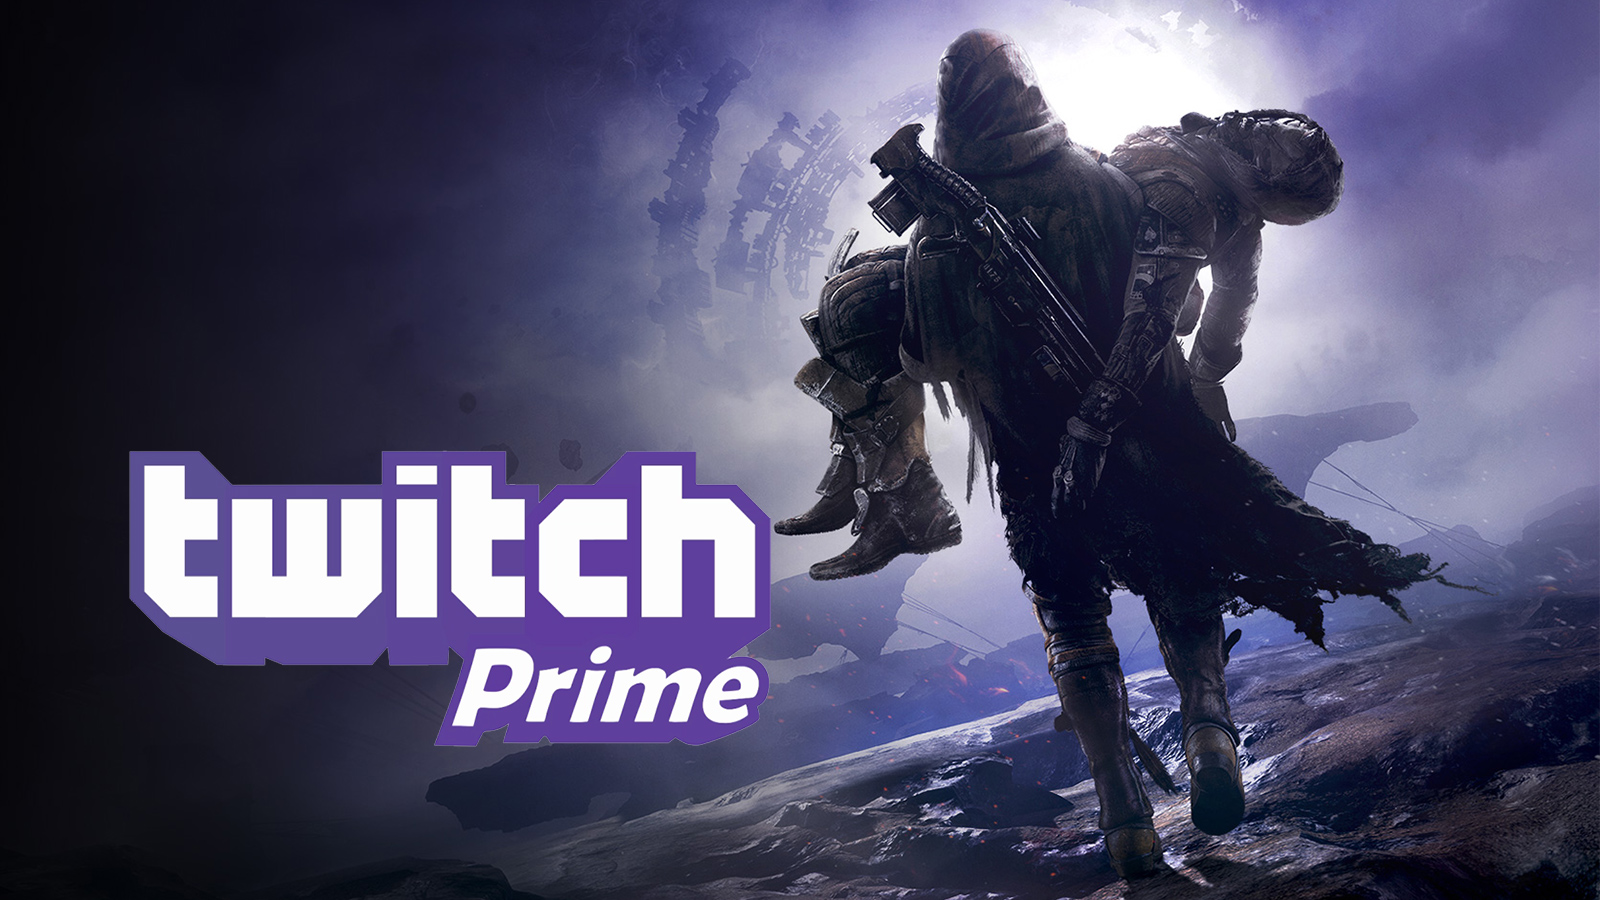 twitch prime loot